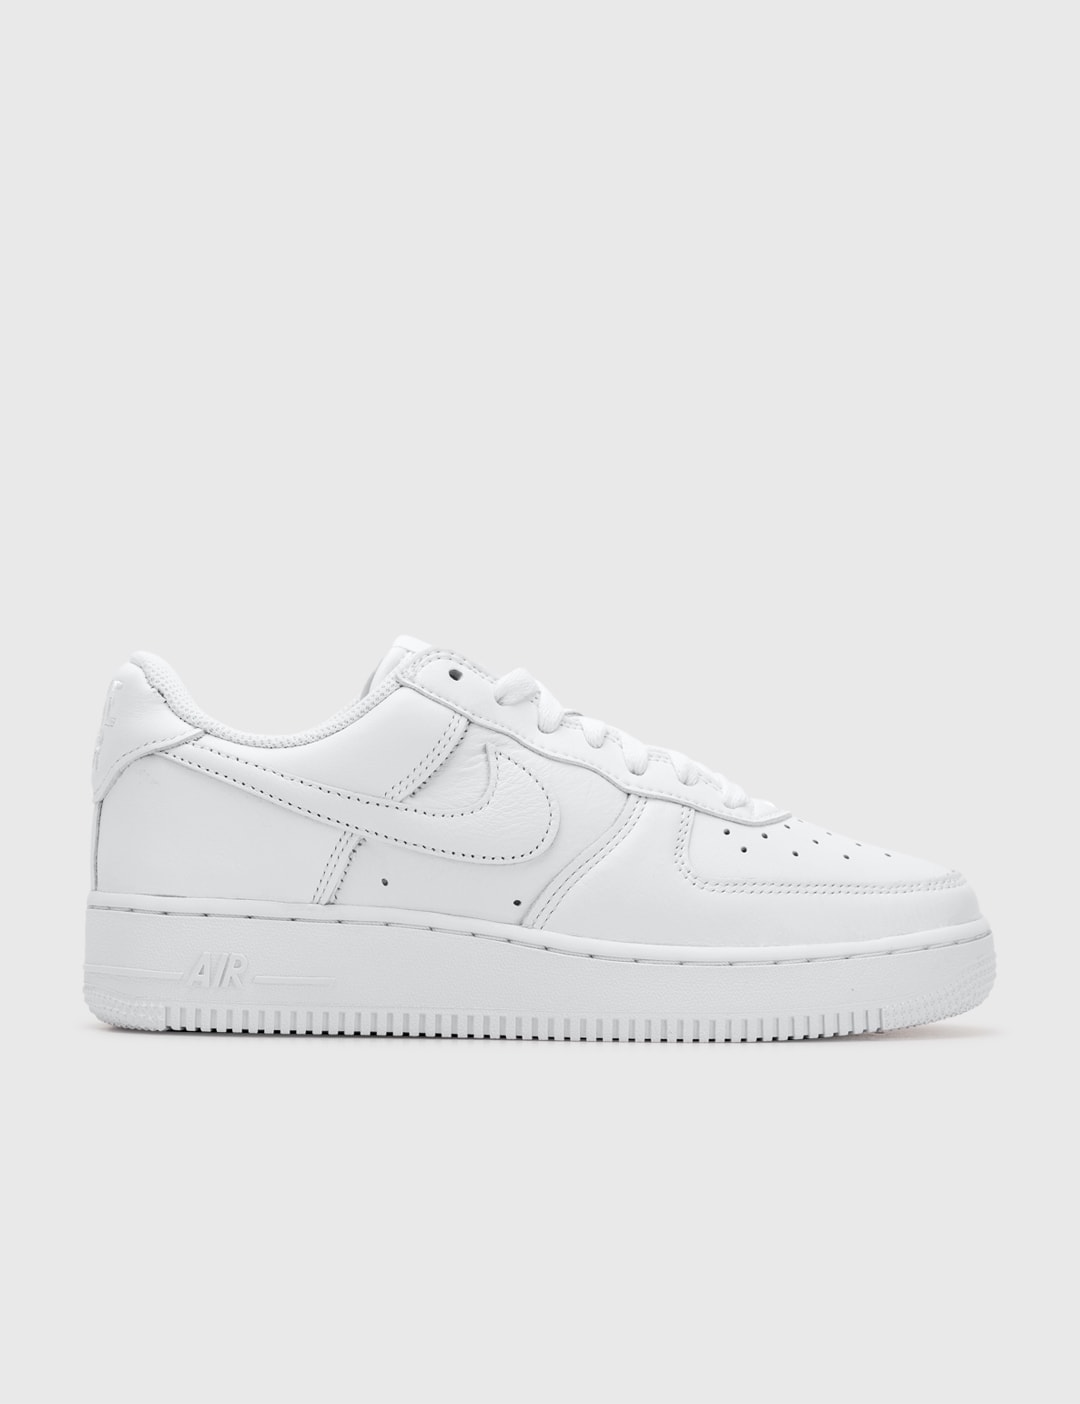 Nike - Nike Air Force 1 '07 LV8 EMB  HBX - Globally Curated Fashion and  Lifestyle by Hypebeast